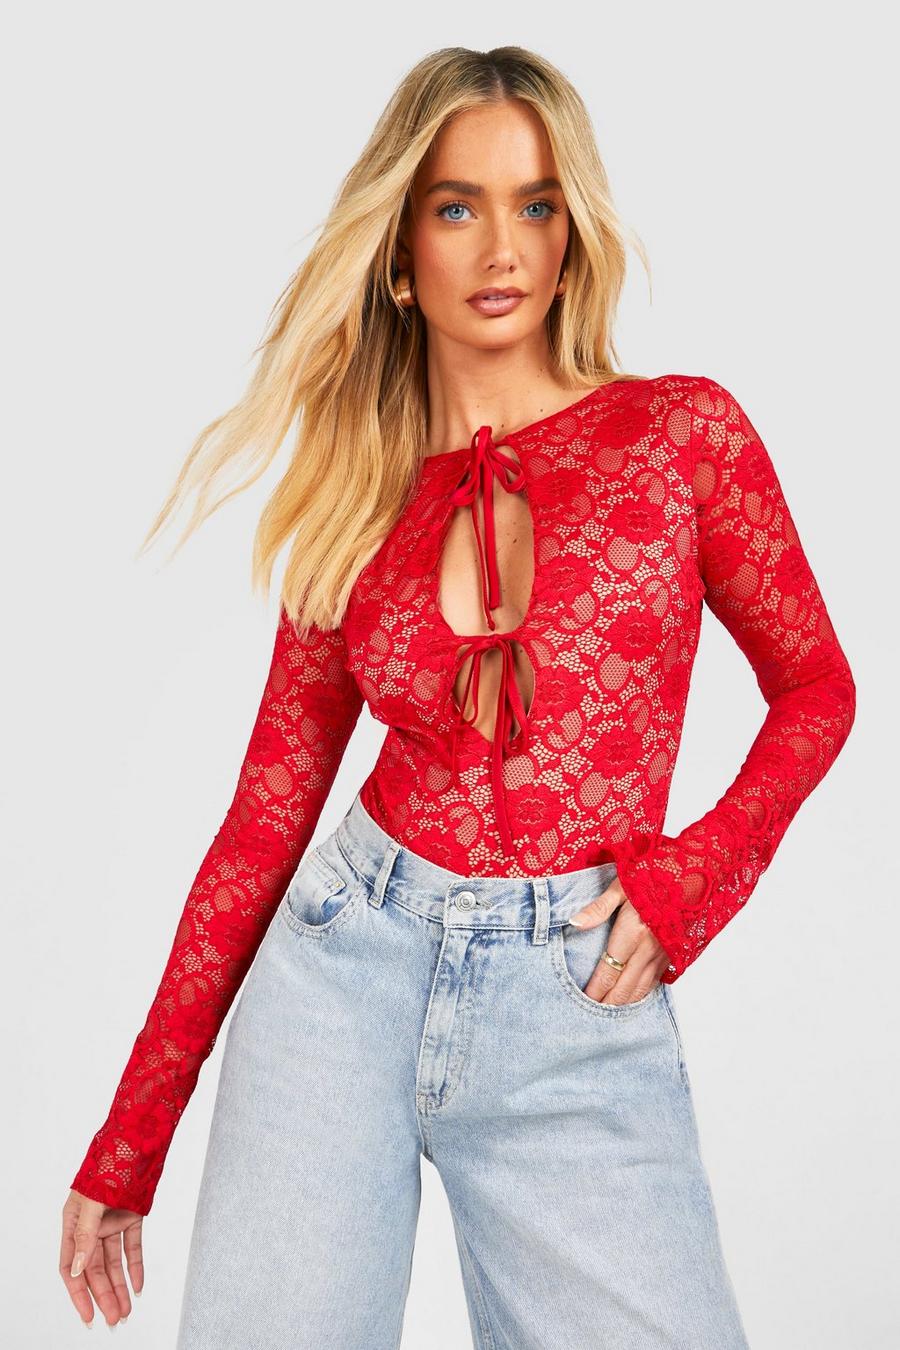 Bodysuit long sleeve floral black and red size 4 small